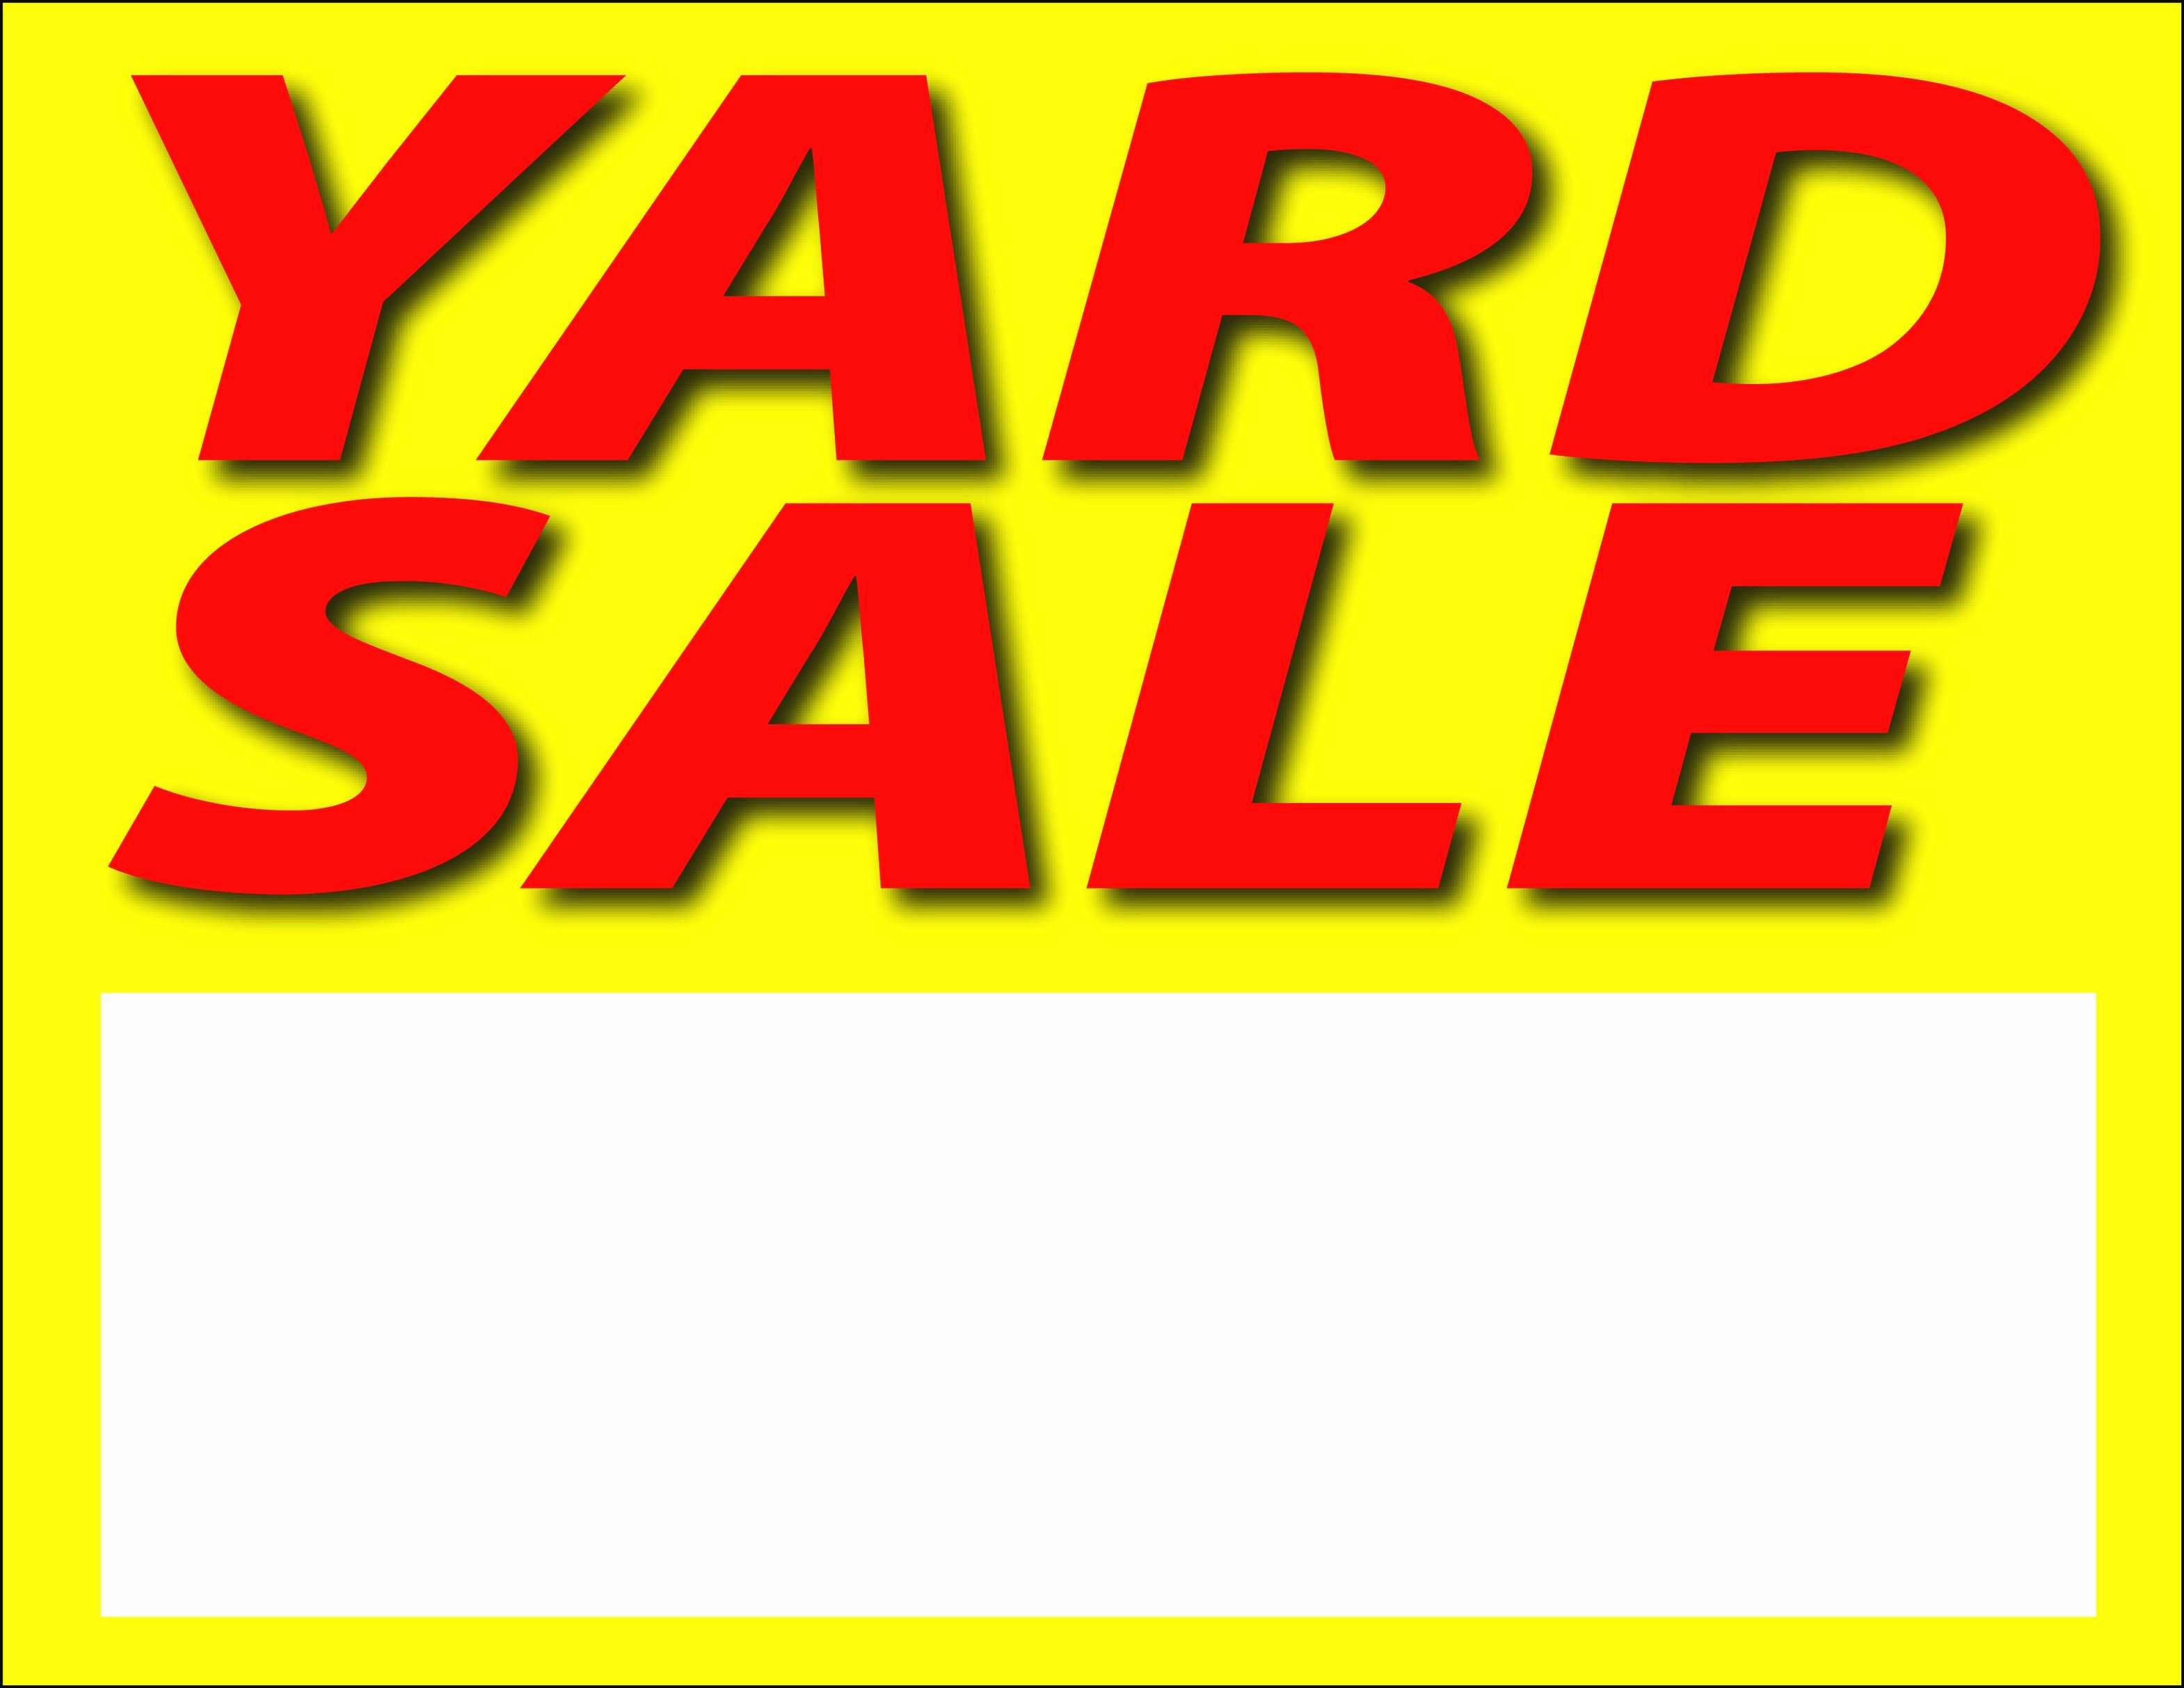 008 Yard Sale Signs Templates Sign Template Beautiful Examples - Free Printable Yard Sale Signs